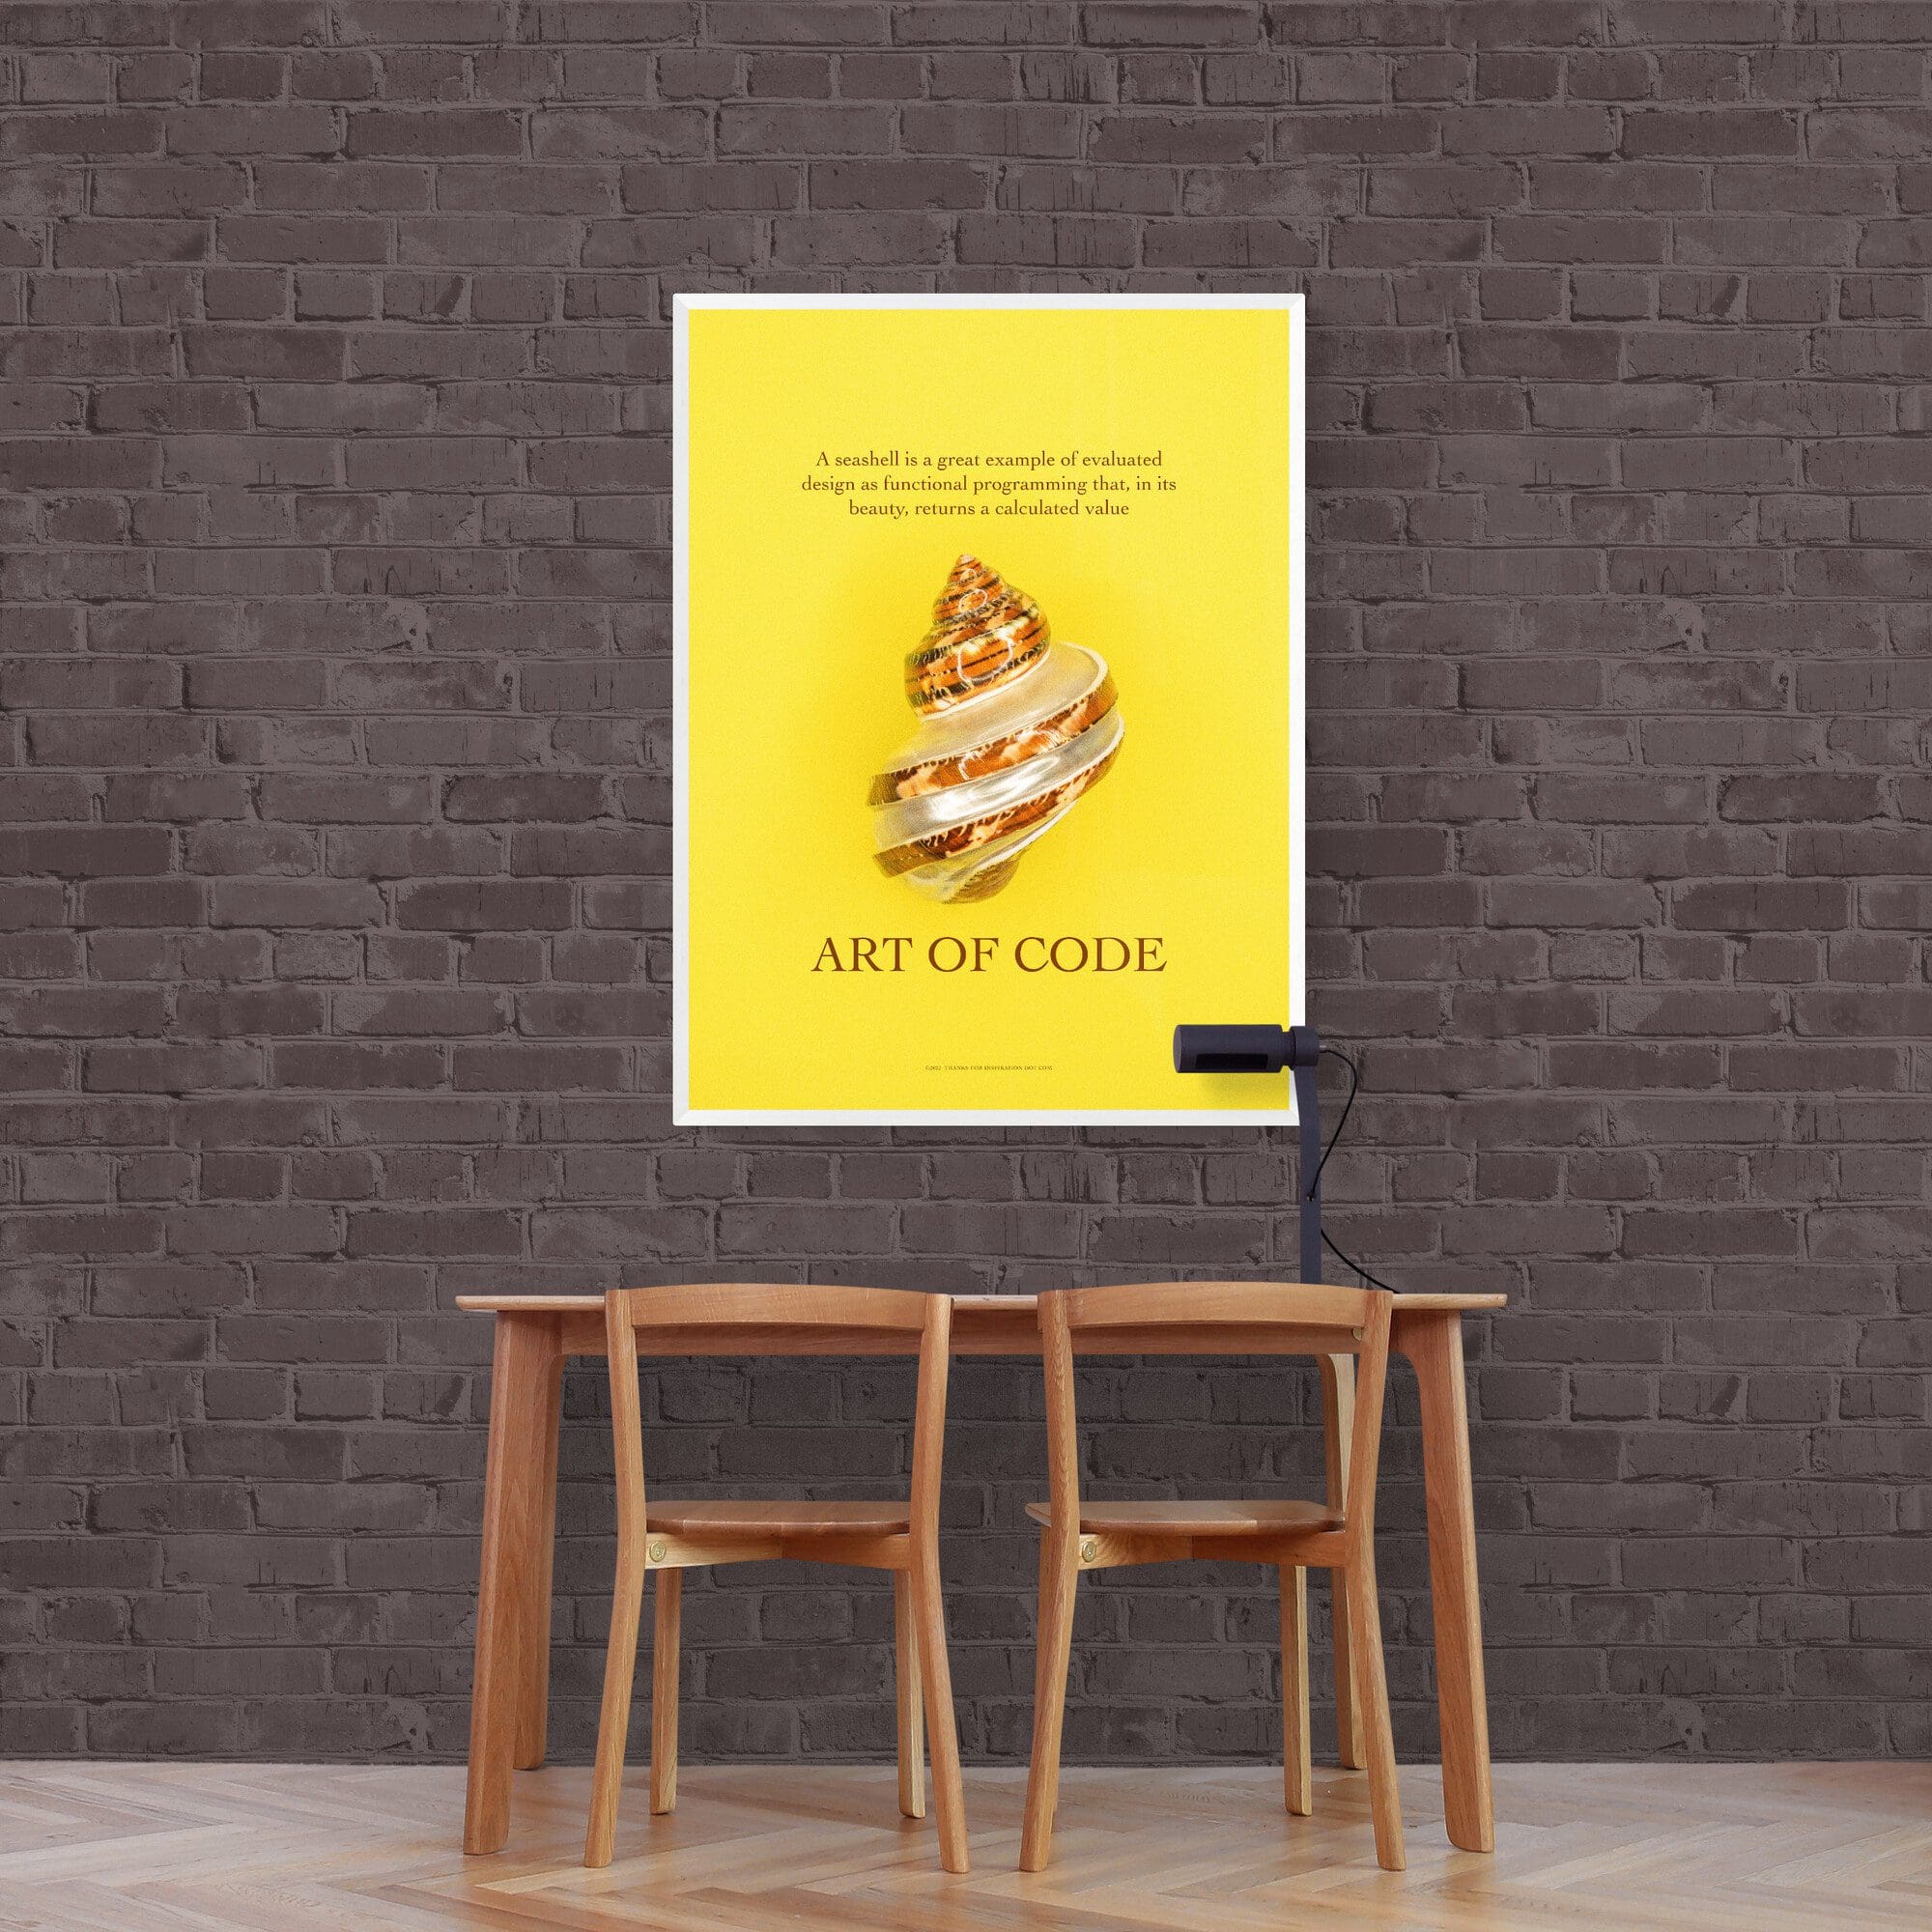 Design Framed Poster White - Black Brick Wall Table And Two Chairs The_empty_study_room